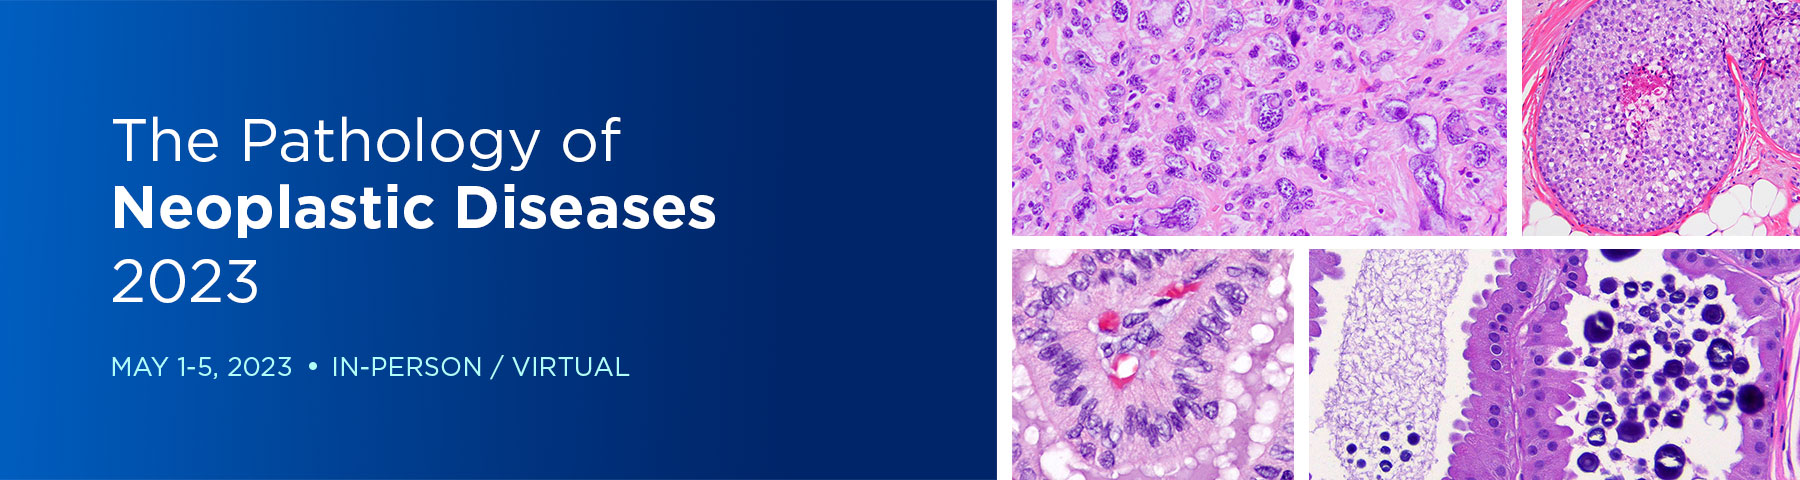 The Pathology of Neoplastic Diseases 2023 Banner